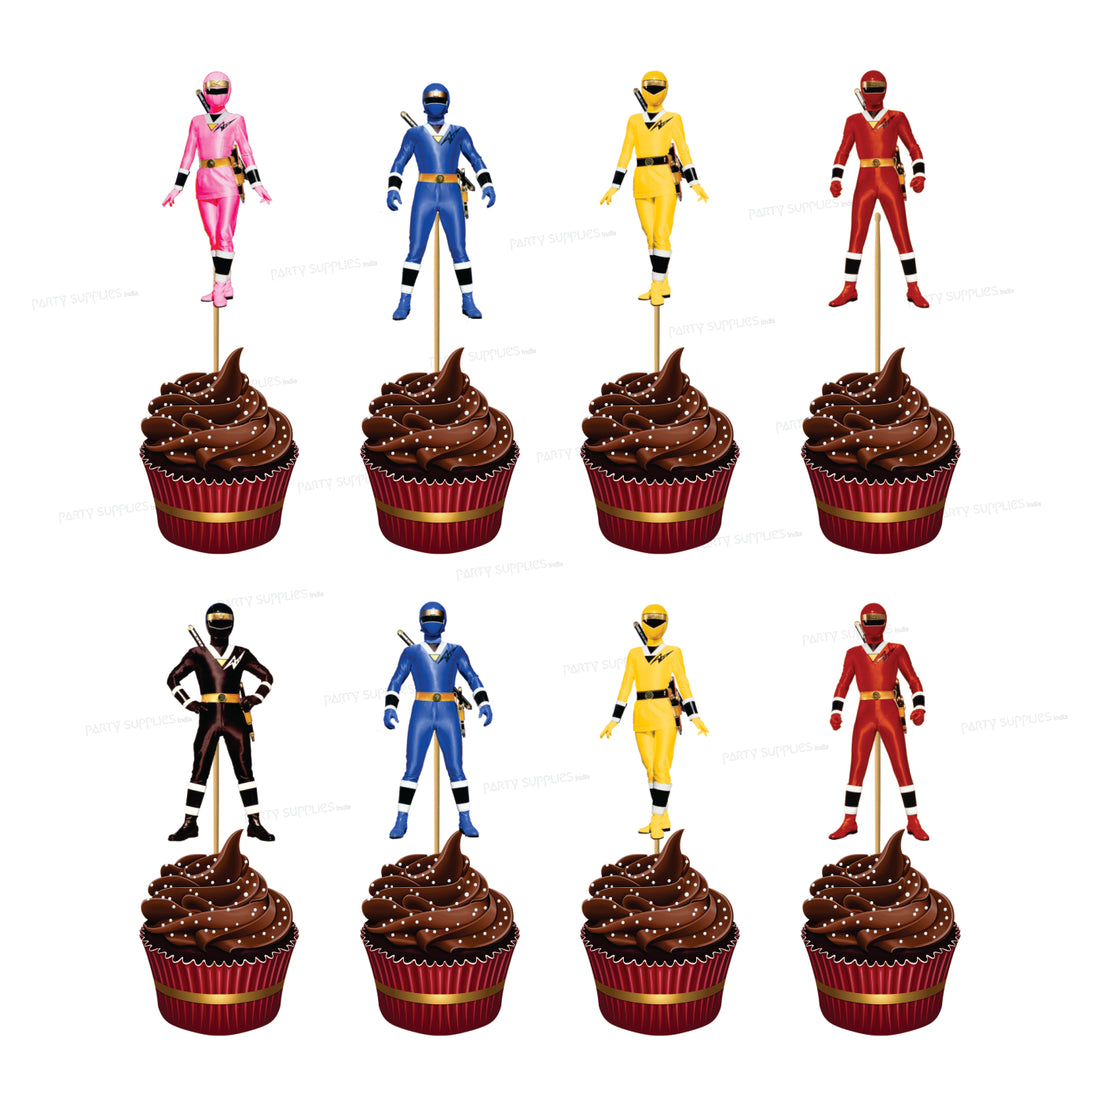 PSI Power Rangers Theme Cup Cake Topper